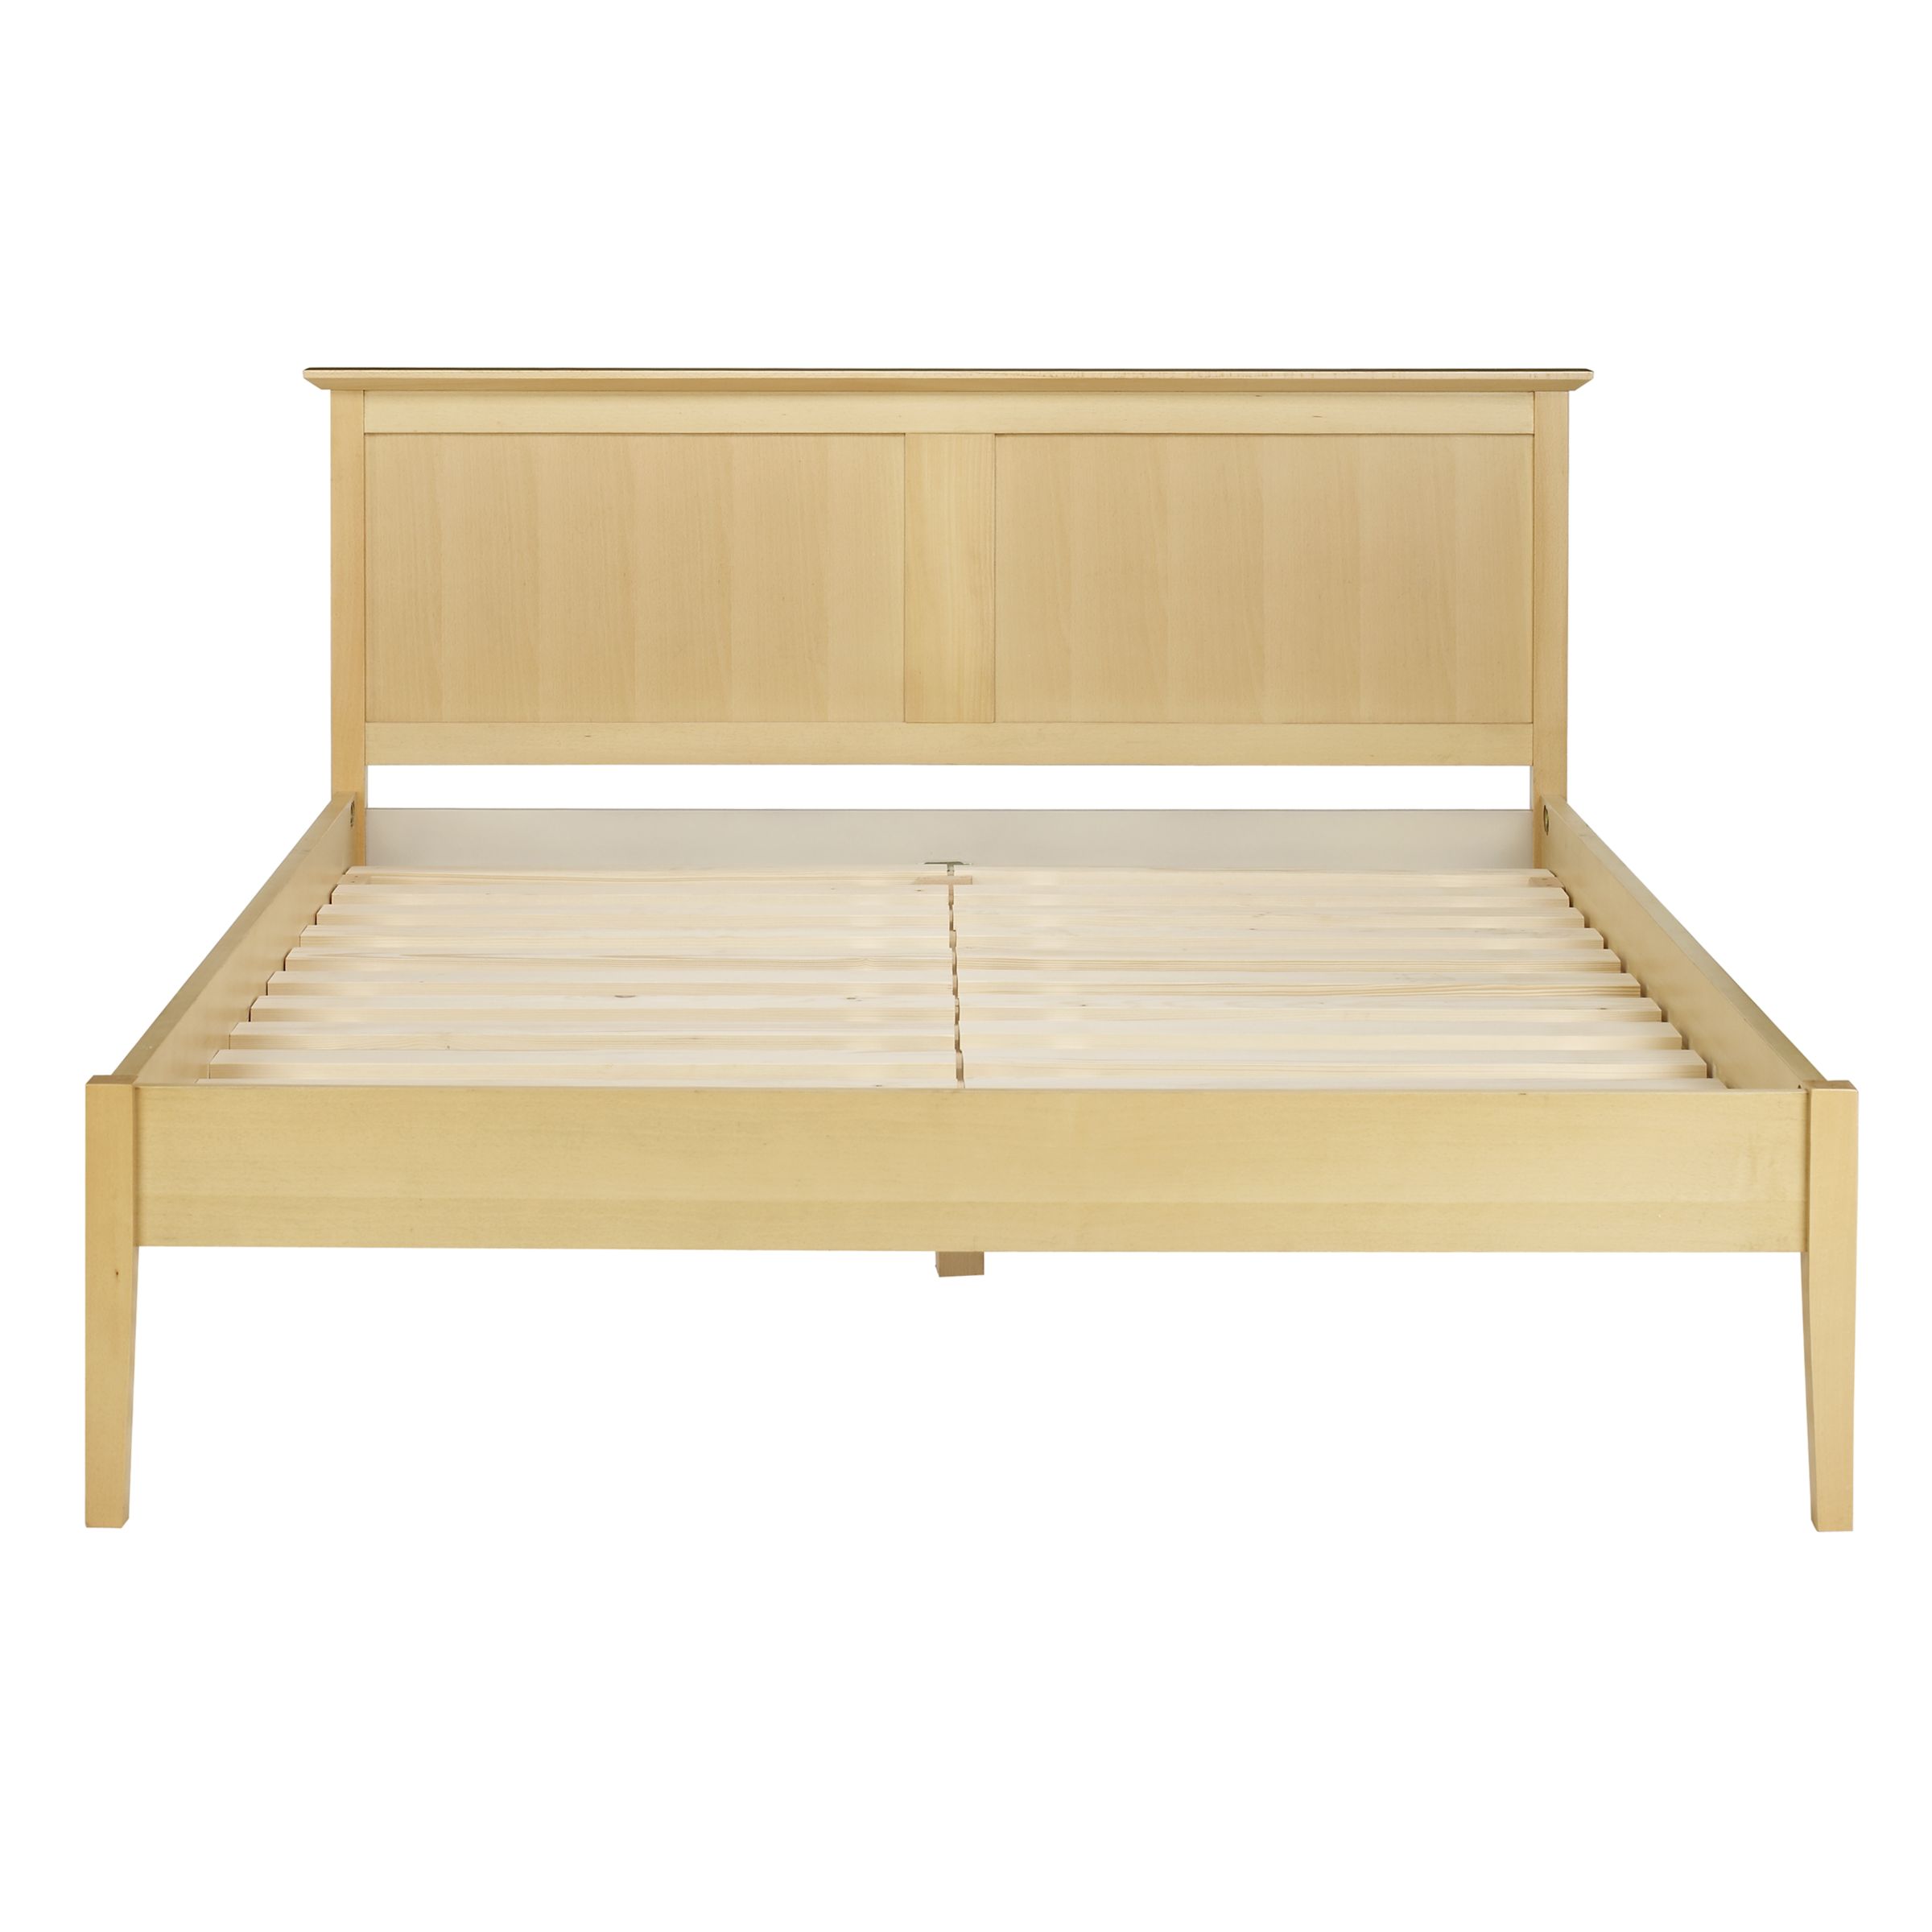 John Lewis Barton Small Double Bedstead at JohnLewis